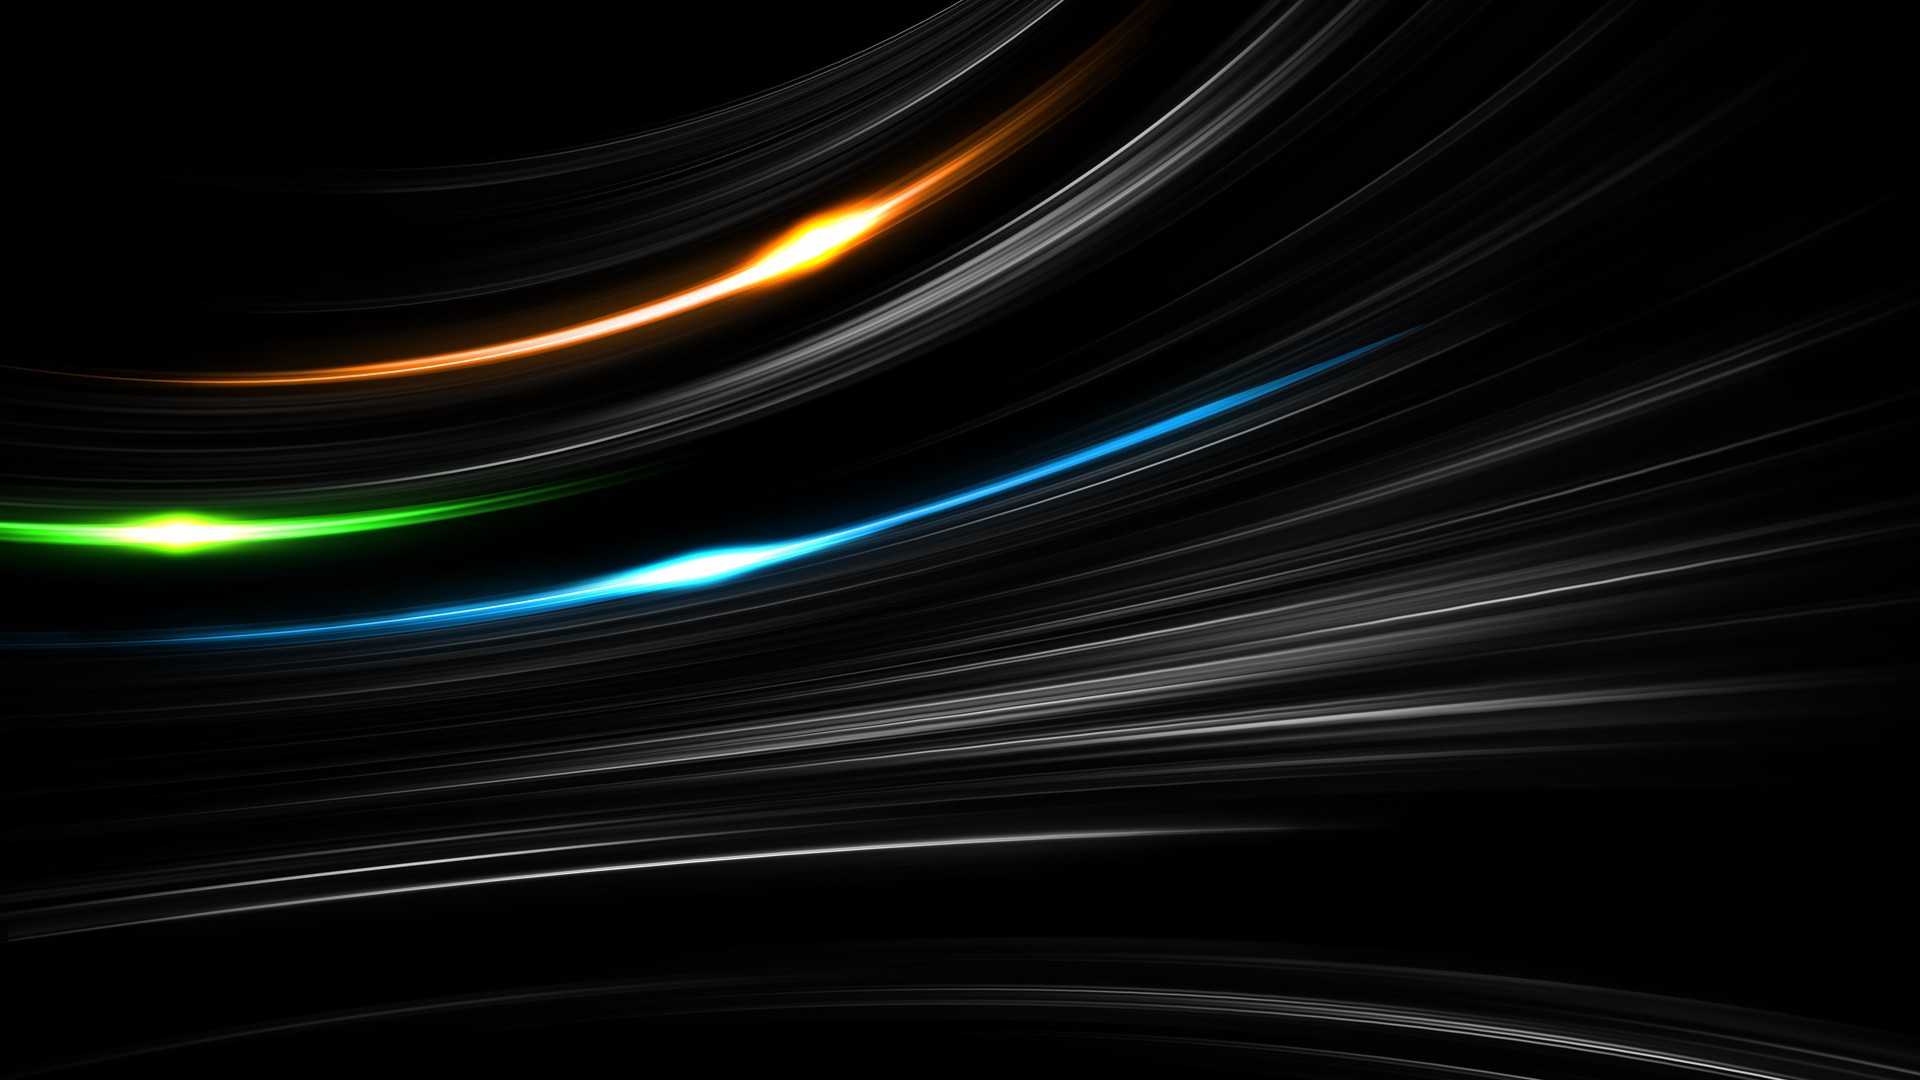 General 1920x1080 minimalism black background digital art abstract lines glowing orange blue green beam selective coloring shapes wavy lines